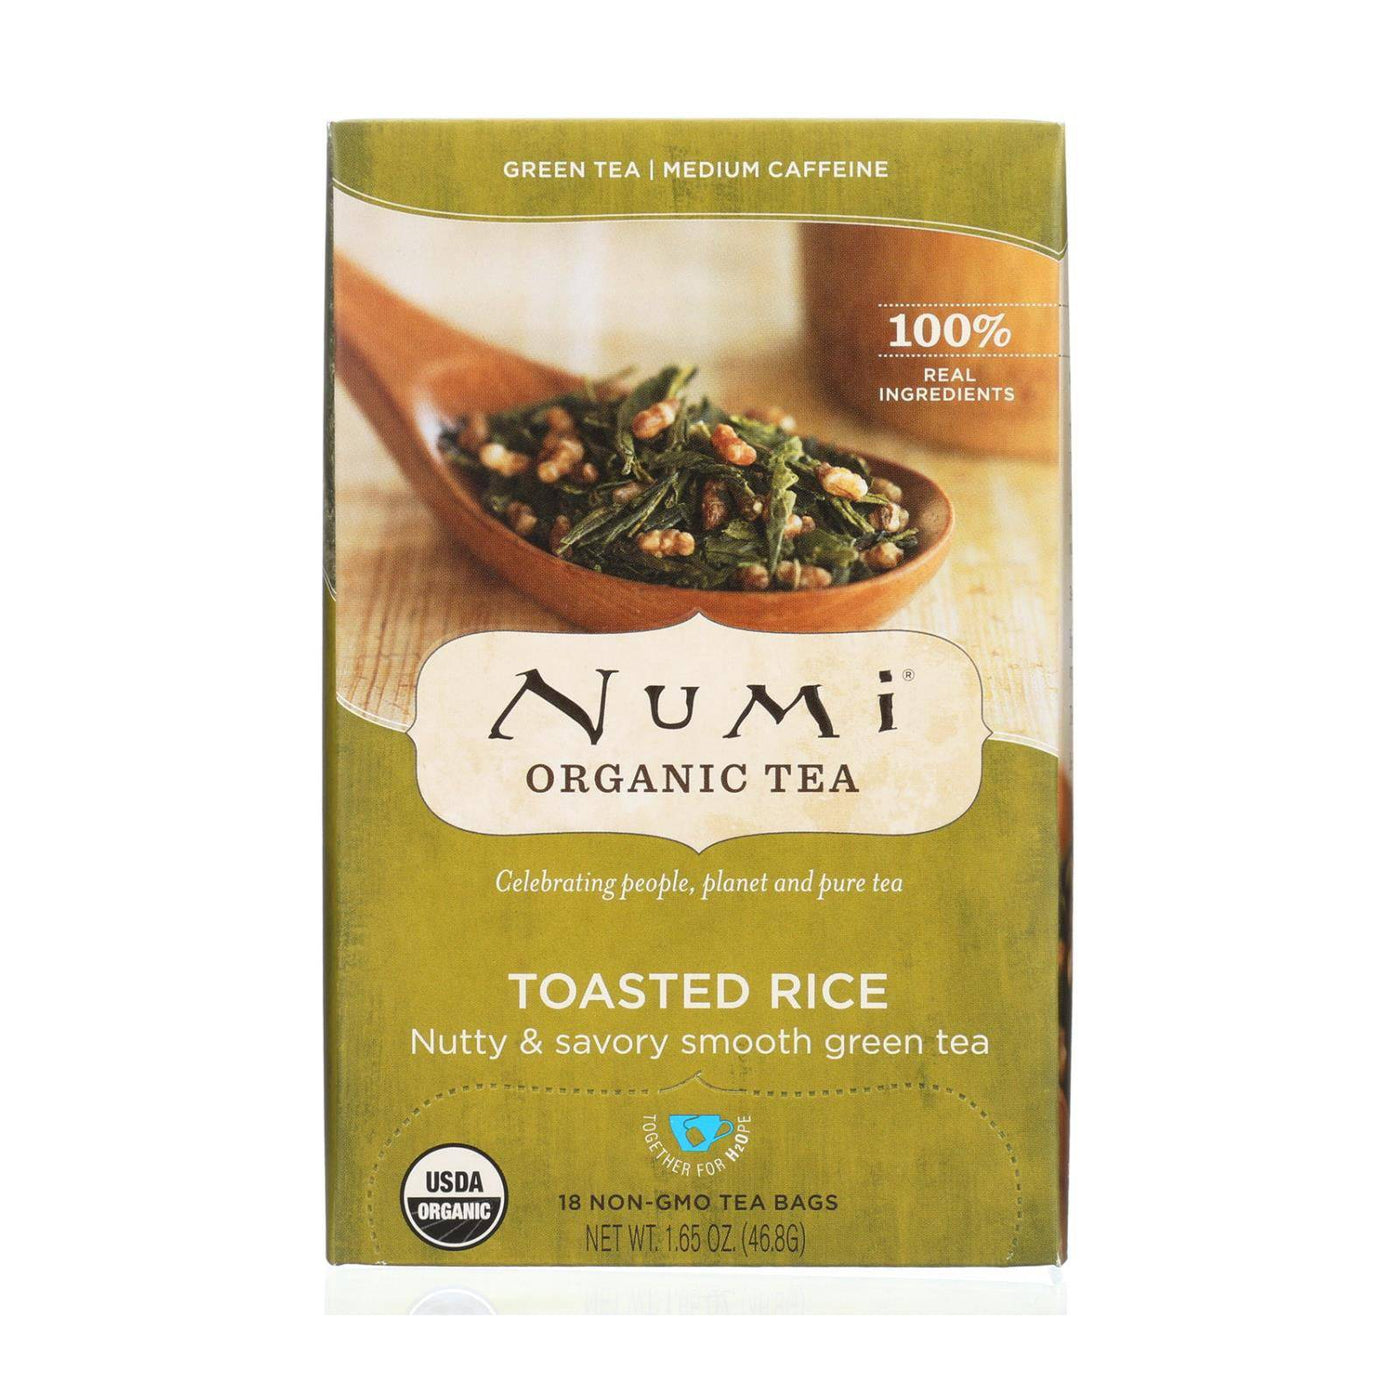 Numi Tea Toasted Rice Green Tea - Organic - Case Of 6 - 18 Bags | OnlyNaturals.us